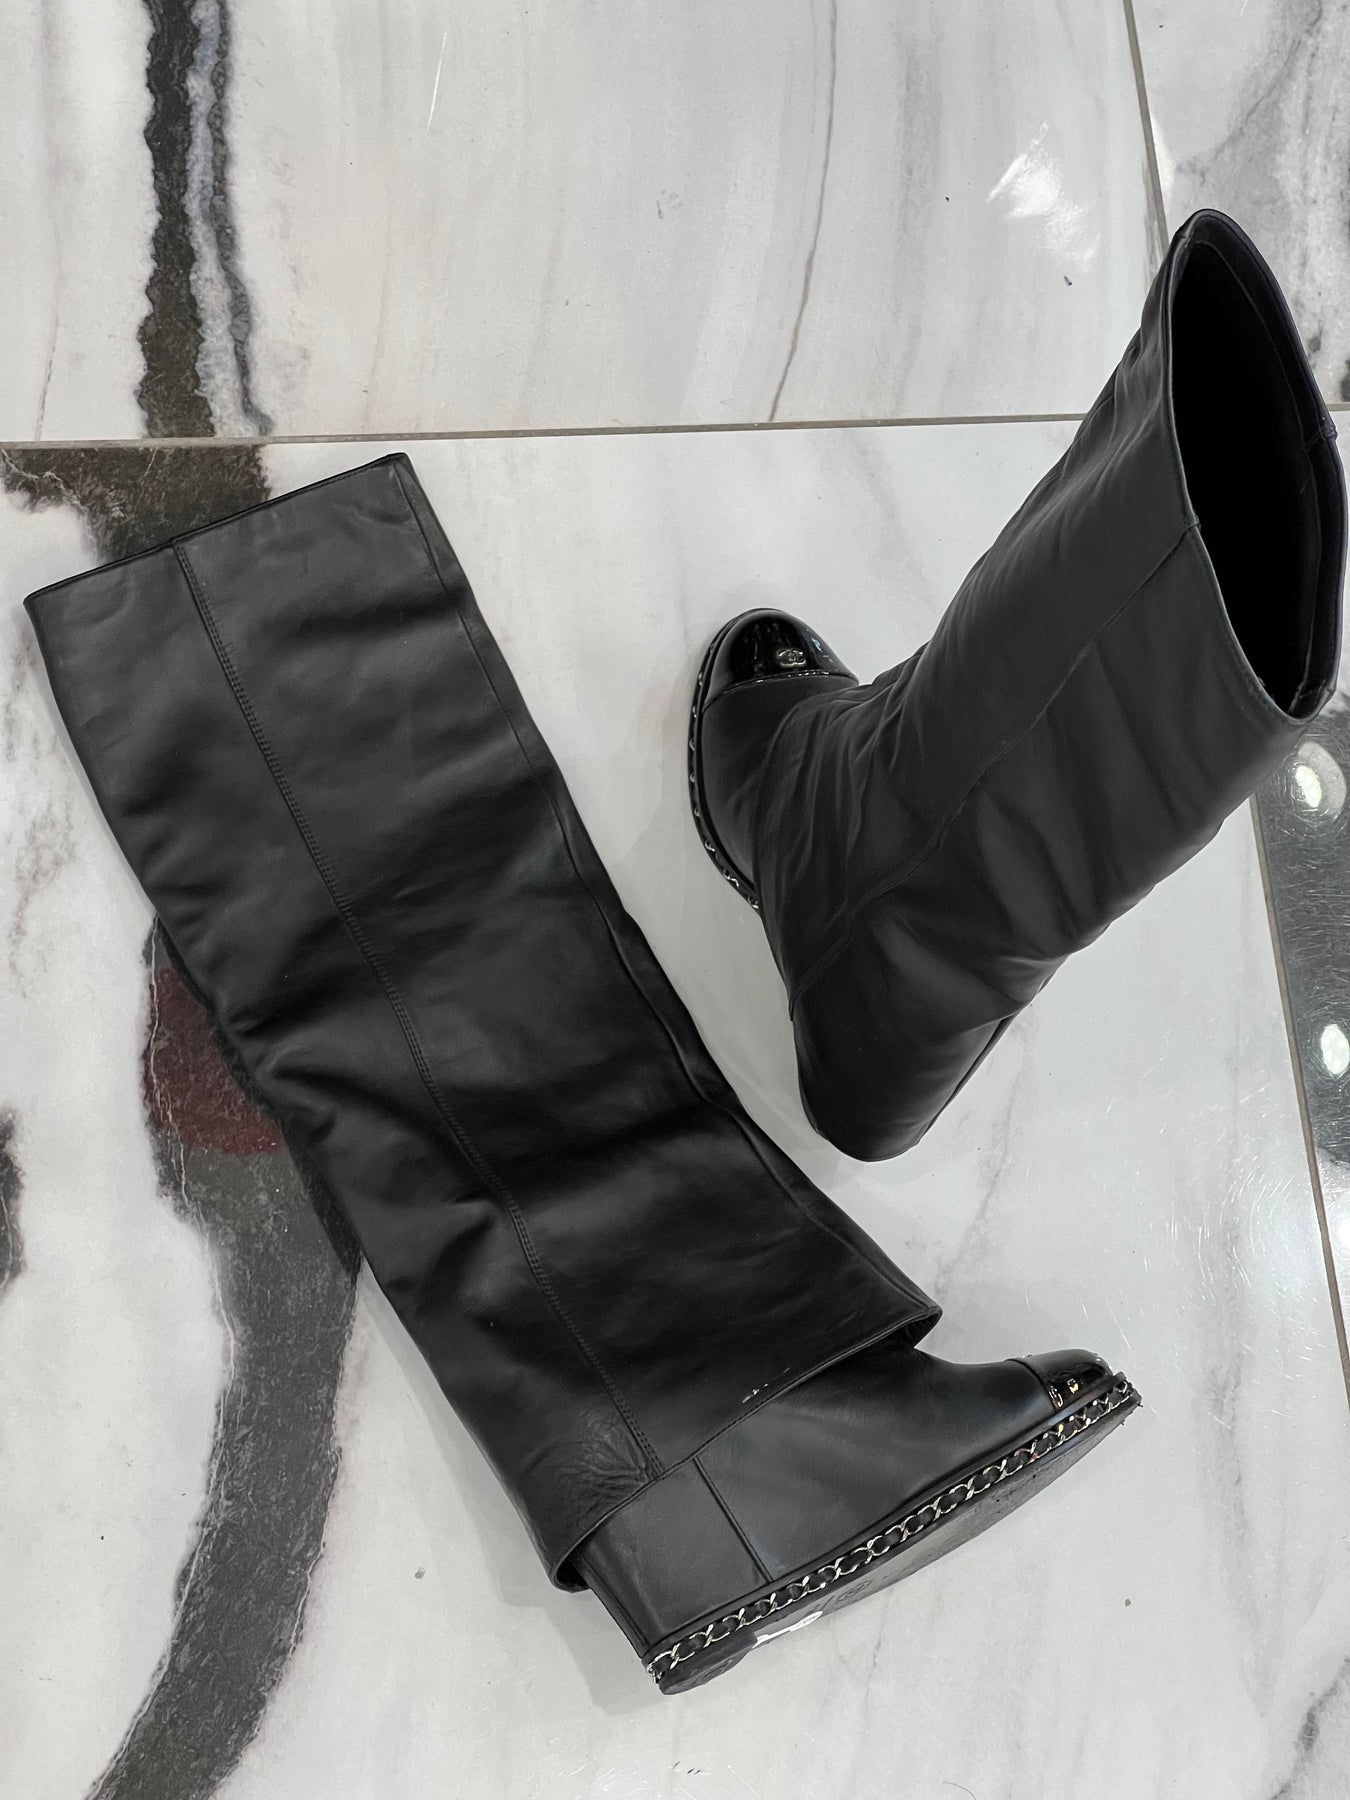 CHANEL 15B Lambskin Leather Tall Over The Knee High Wedge Heel Boots Black  $2400